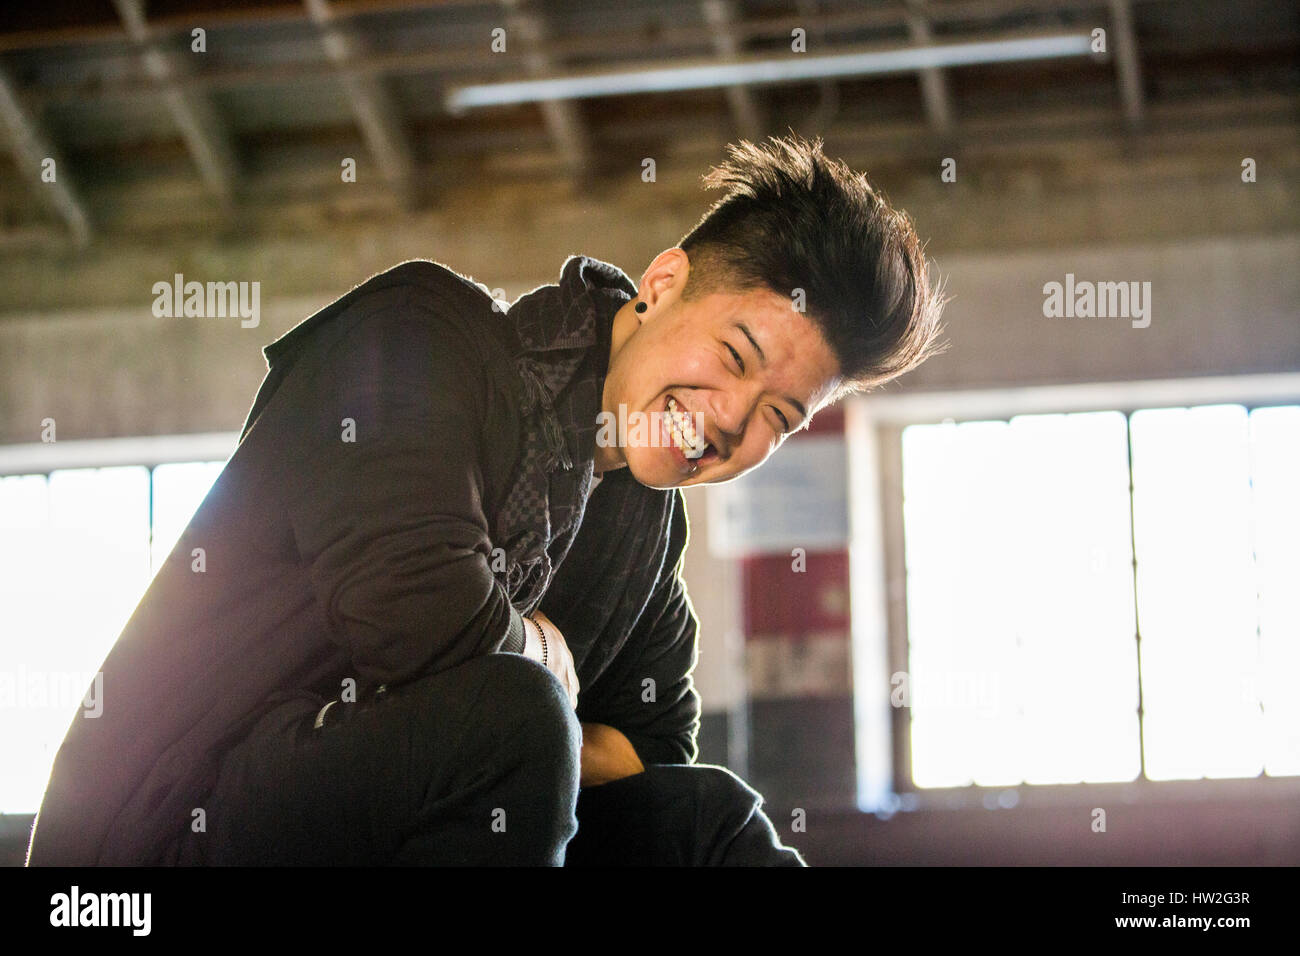 Portrait of laughing androgynous Asian man Stock Photo